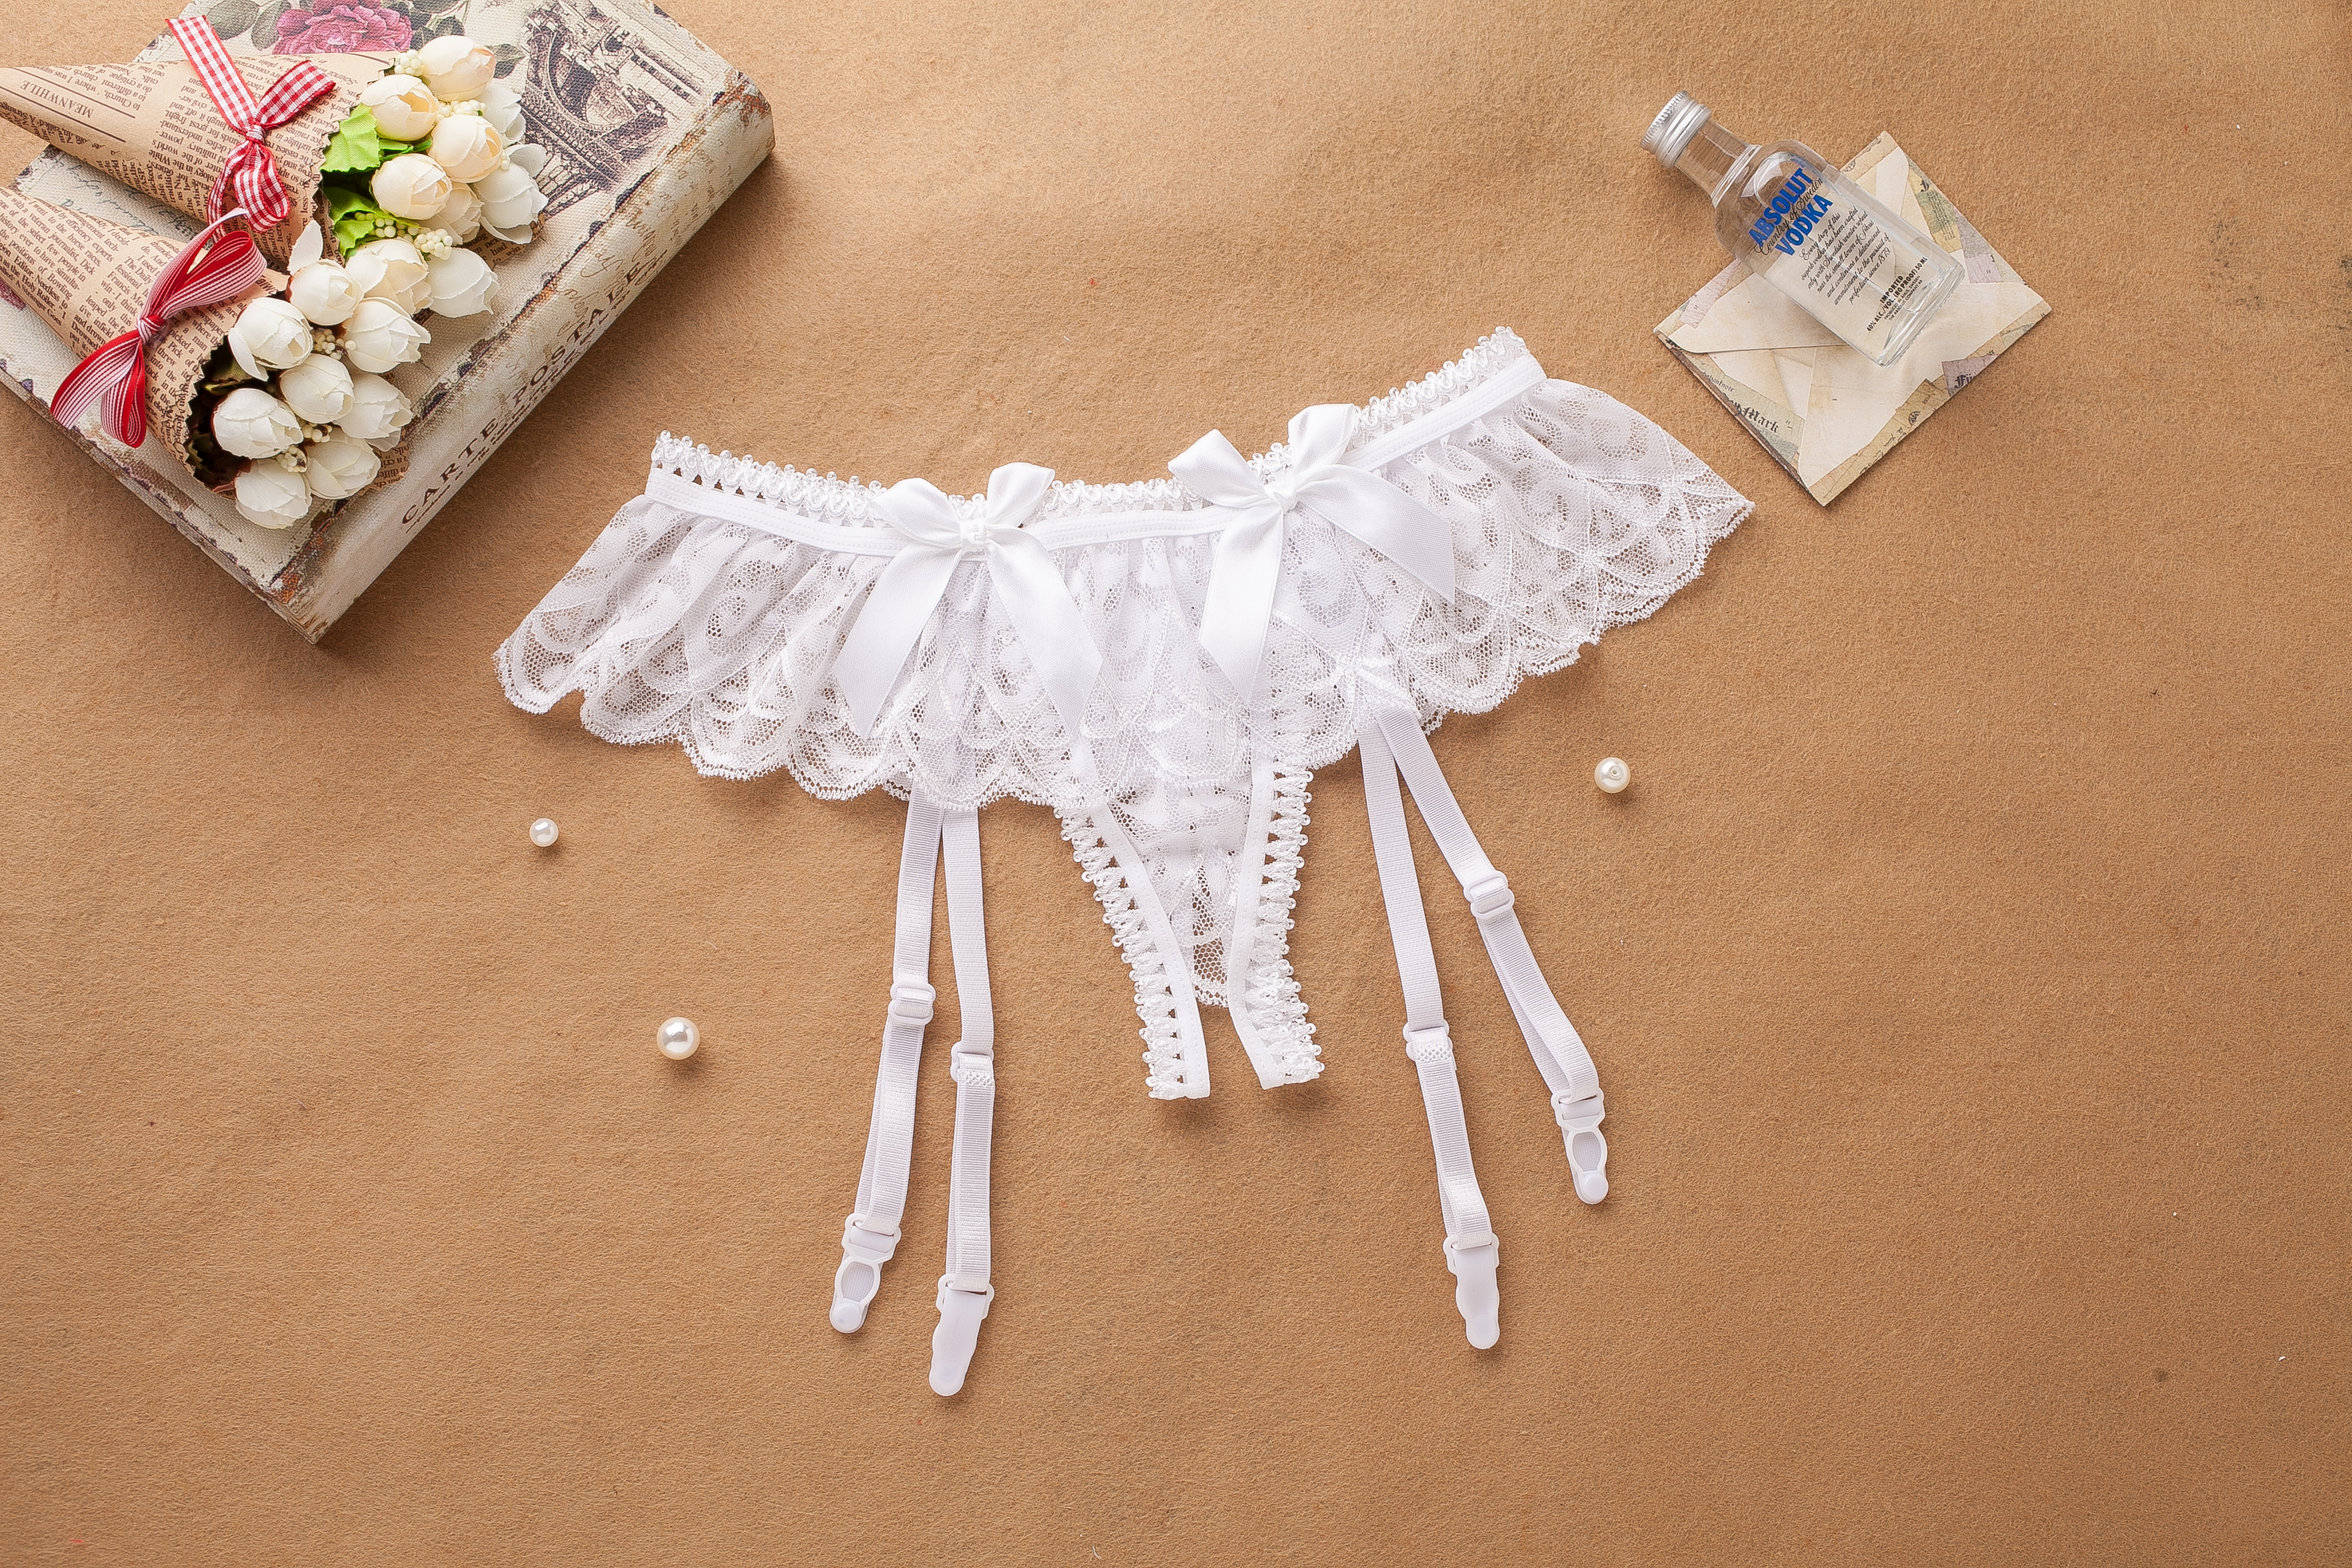 Lace Crotchless G-String with Garters